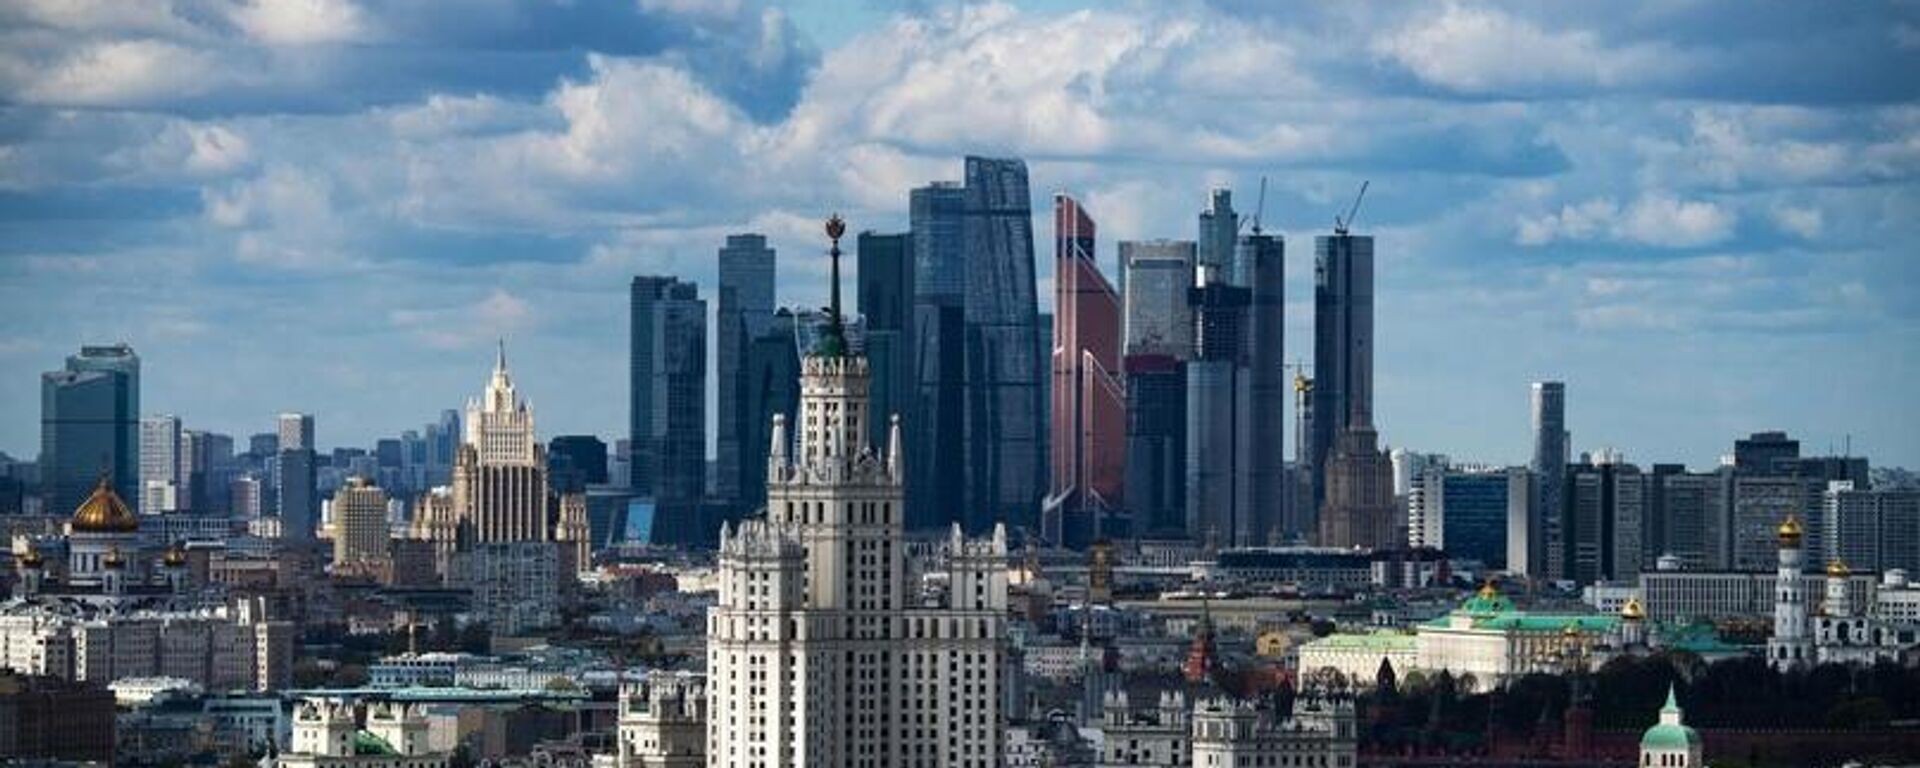 A general view shows the Soviet era skyscraper on Kotelnicheskaya Embankment of the Moskva river, Foreign ministry headquarters, Radisson Royal Hotel Moscow, the Christ the Savior cathedral and the Kremlin, with the Moscow International Business Centre, also known as Moskva-City, seen in te background, in Moscow, Russia - Sputnik International, 1920, 27.04.2023